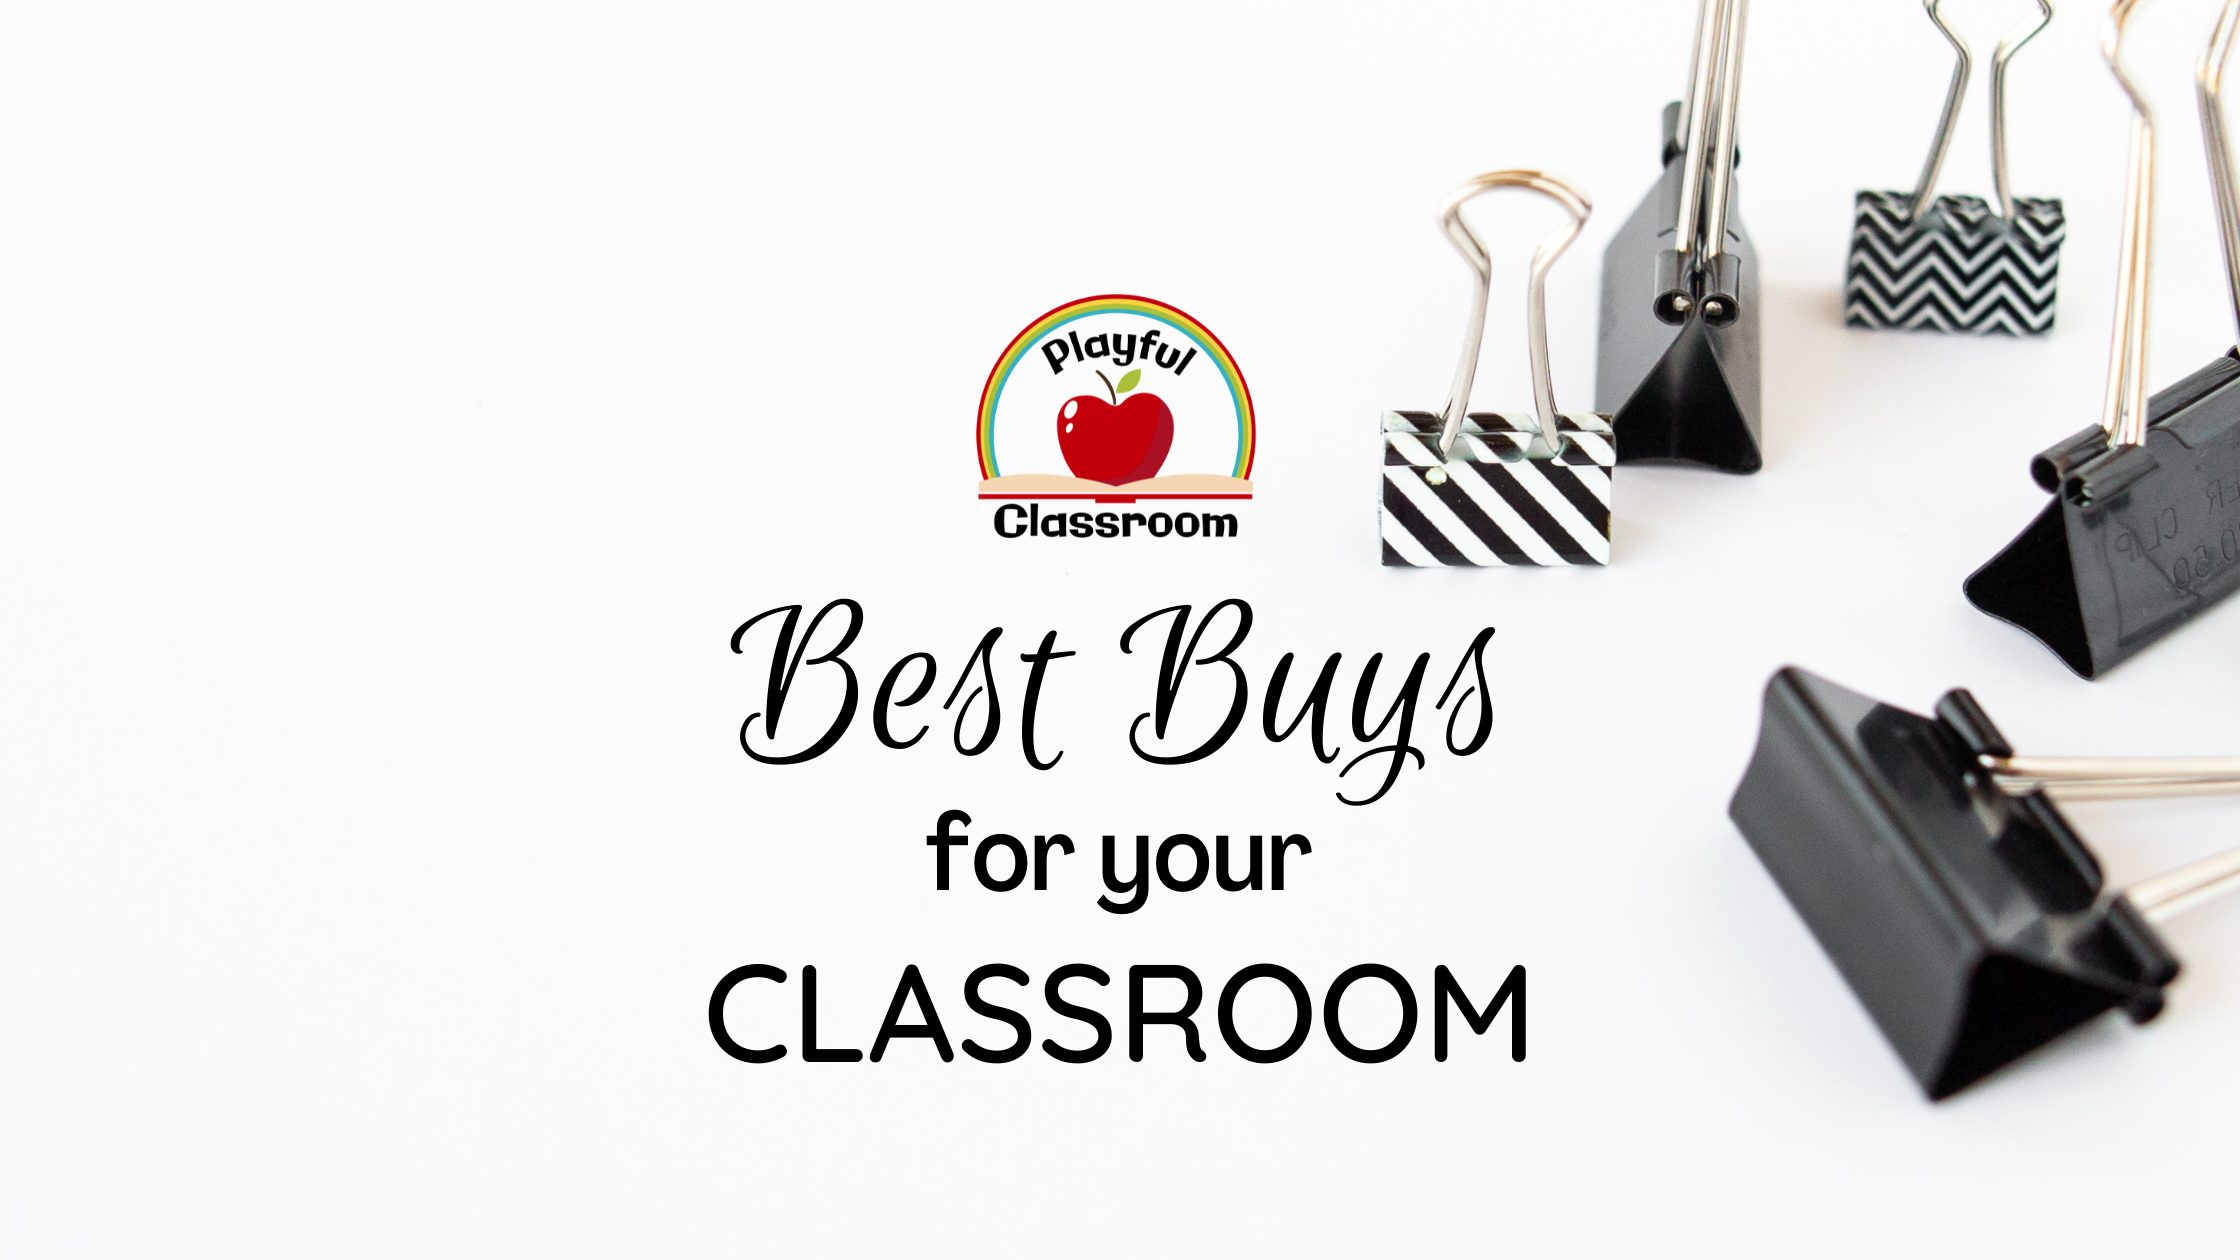 Best Buys for the Classroom